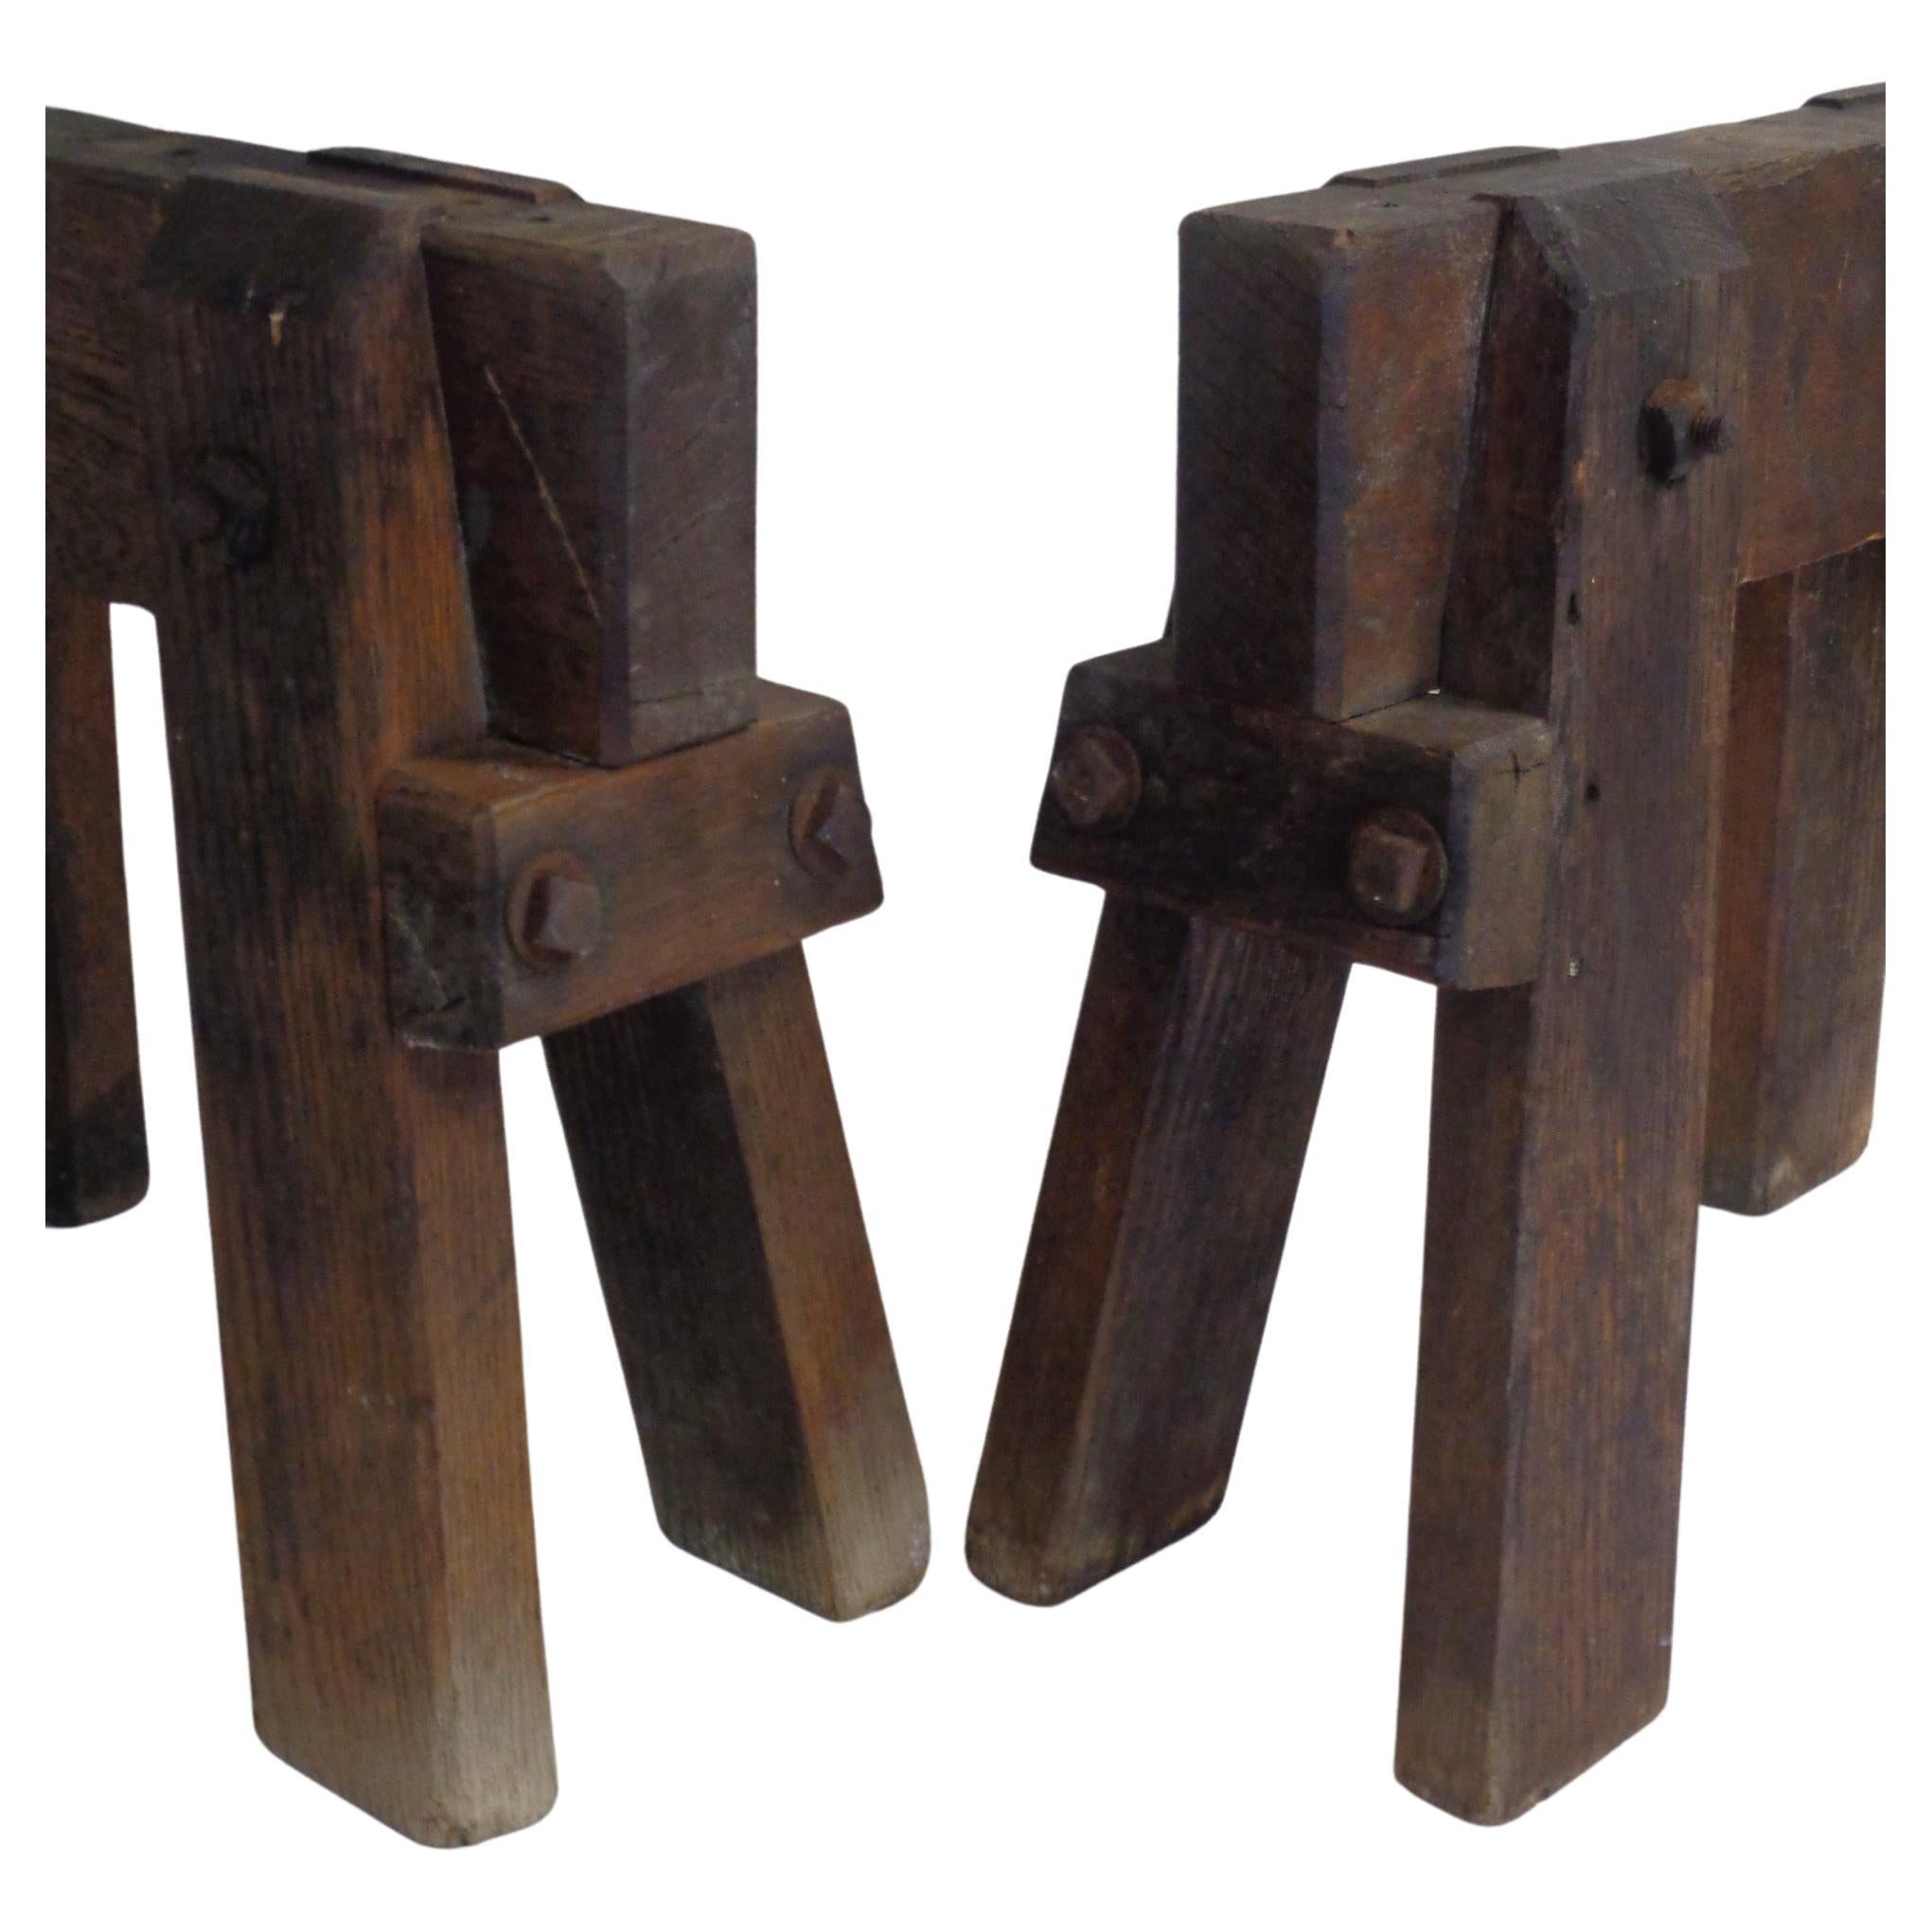 A great looking and hard to find pair of antique miniature solid oak stereotomy sawhorses ( originally used for cutting three dimensional solids into particular shapes - stone / masonry / carpentry ) w/ large iron bolts / nicely chamfered woodwork /